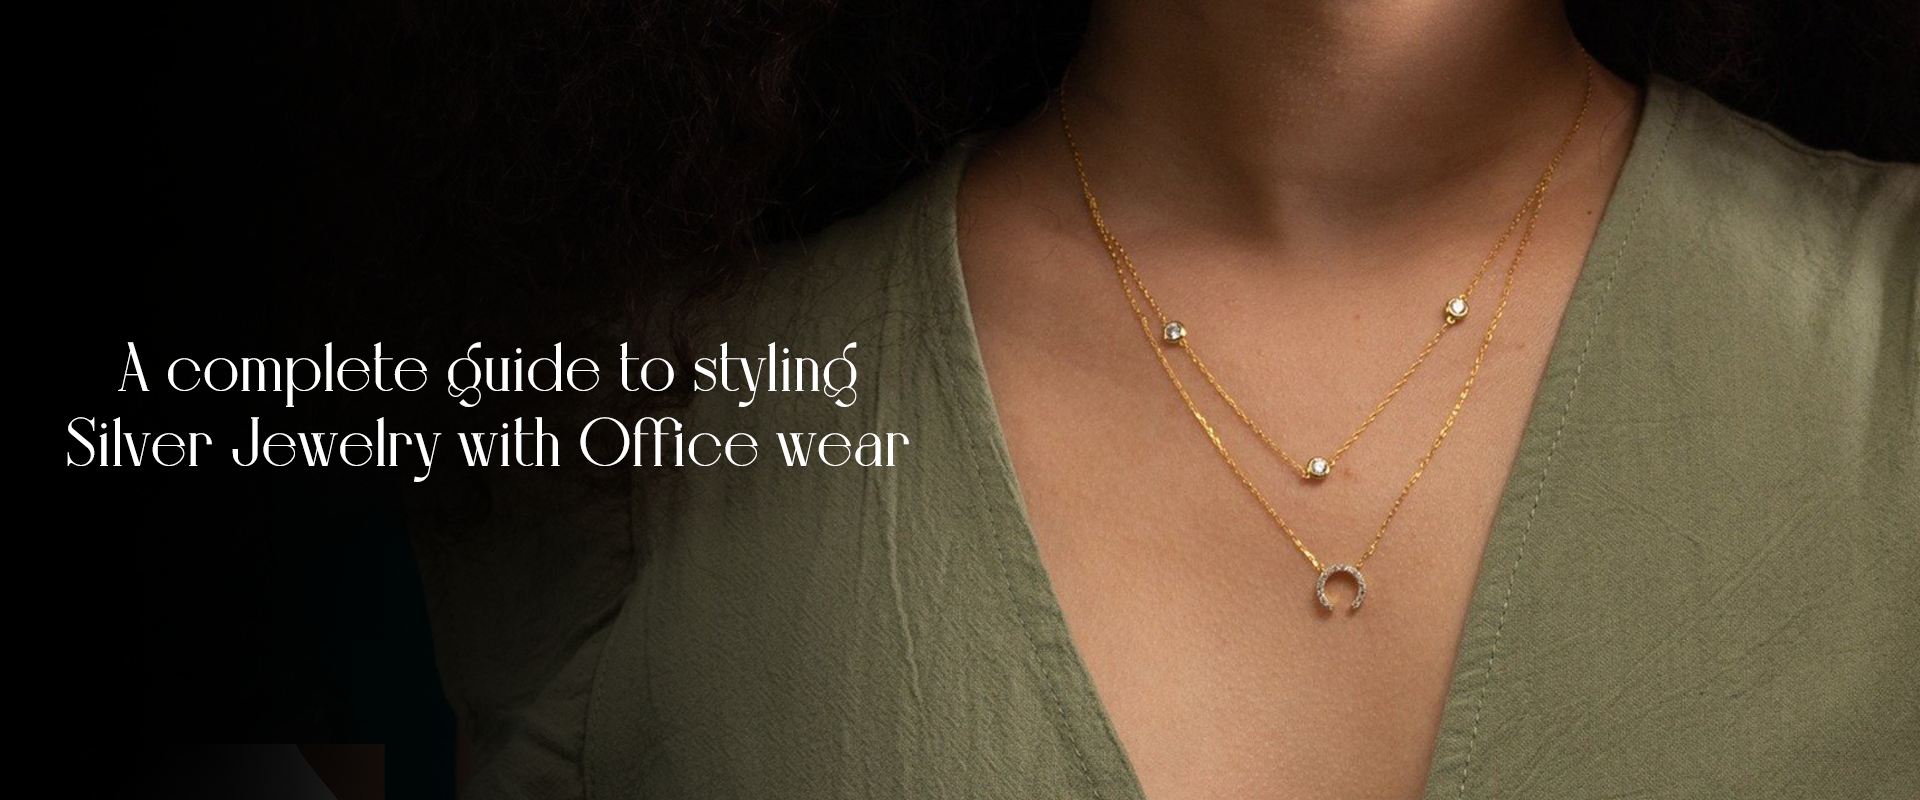 A Complete Guide to Styling Silver Jewelry with Office Wear